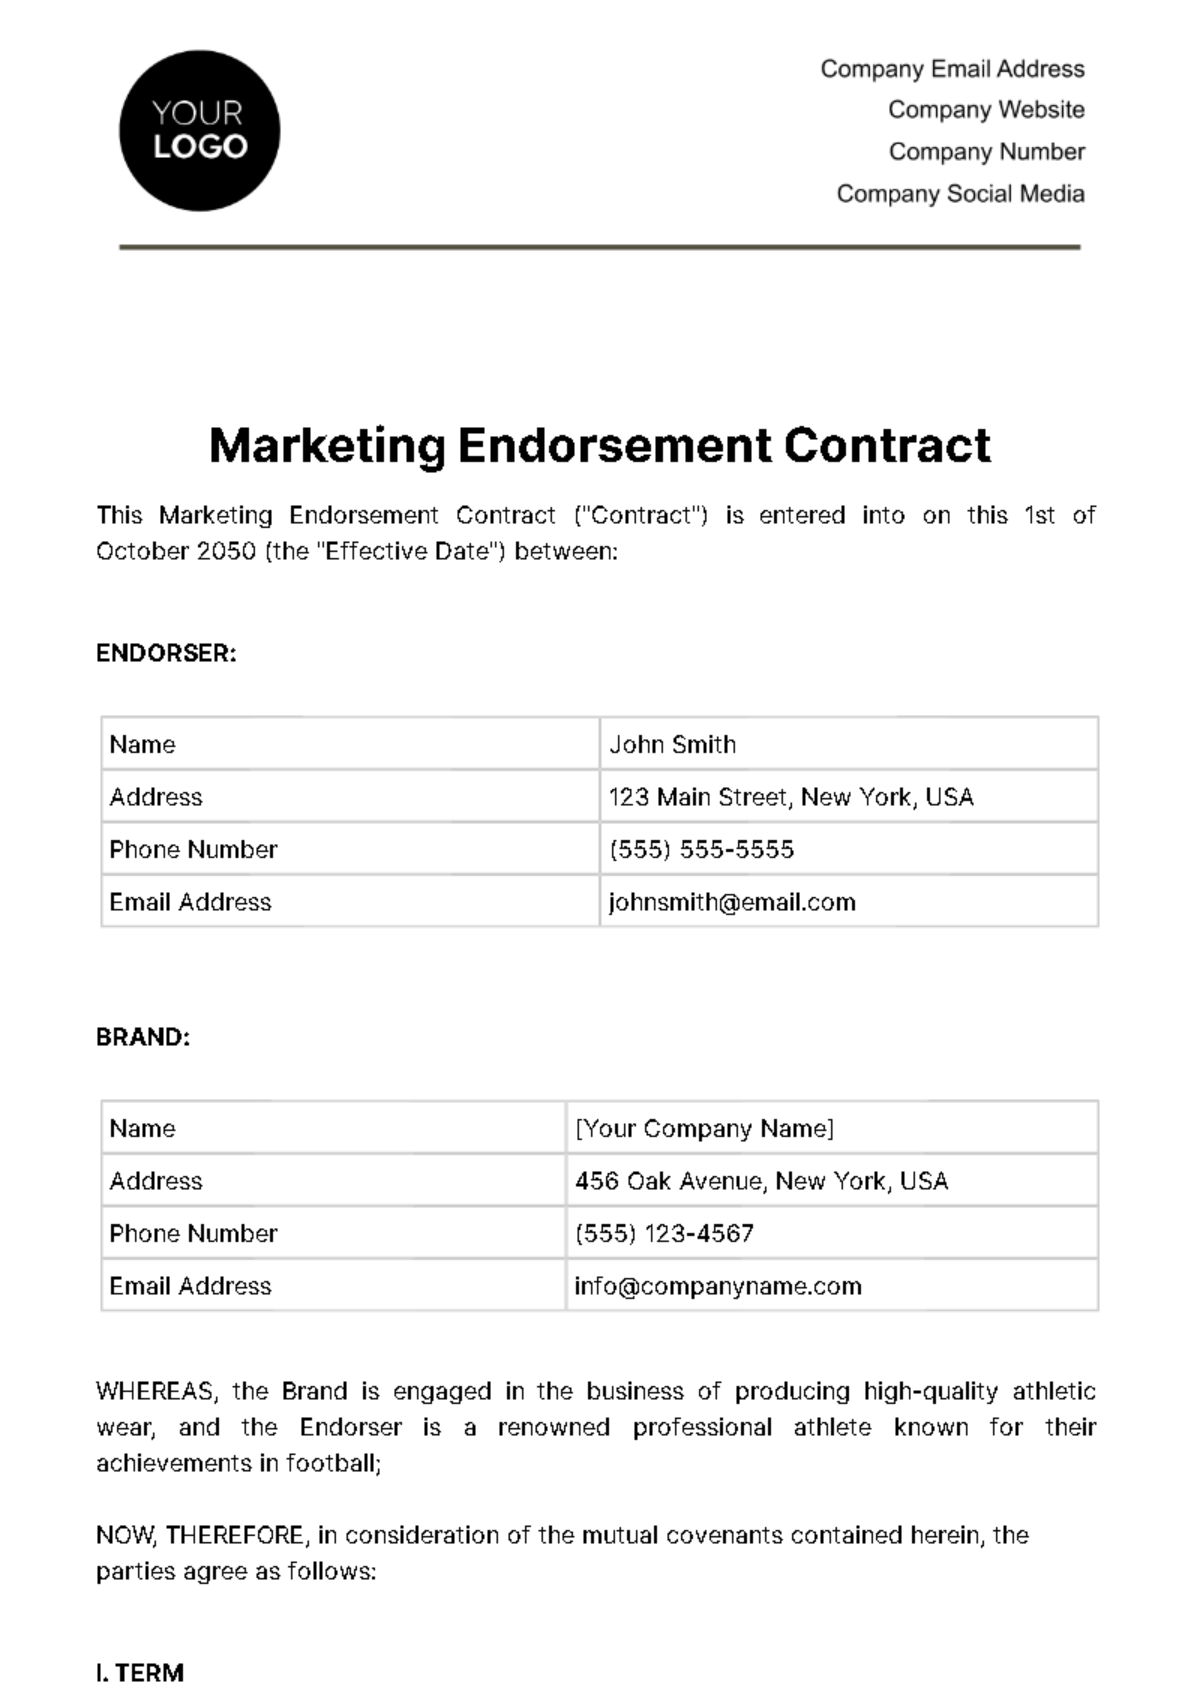 Free Marketing Endorsement Contract Template